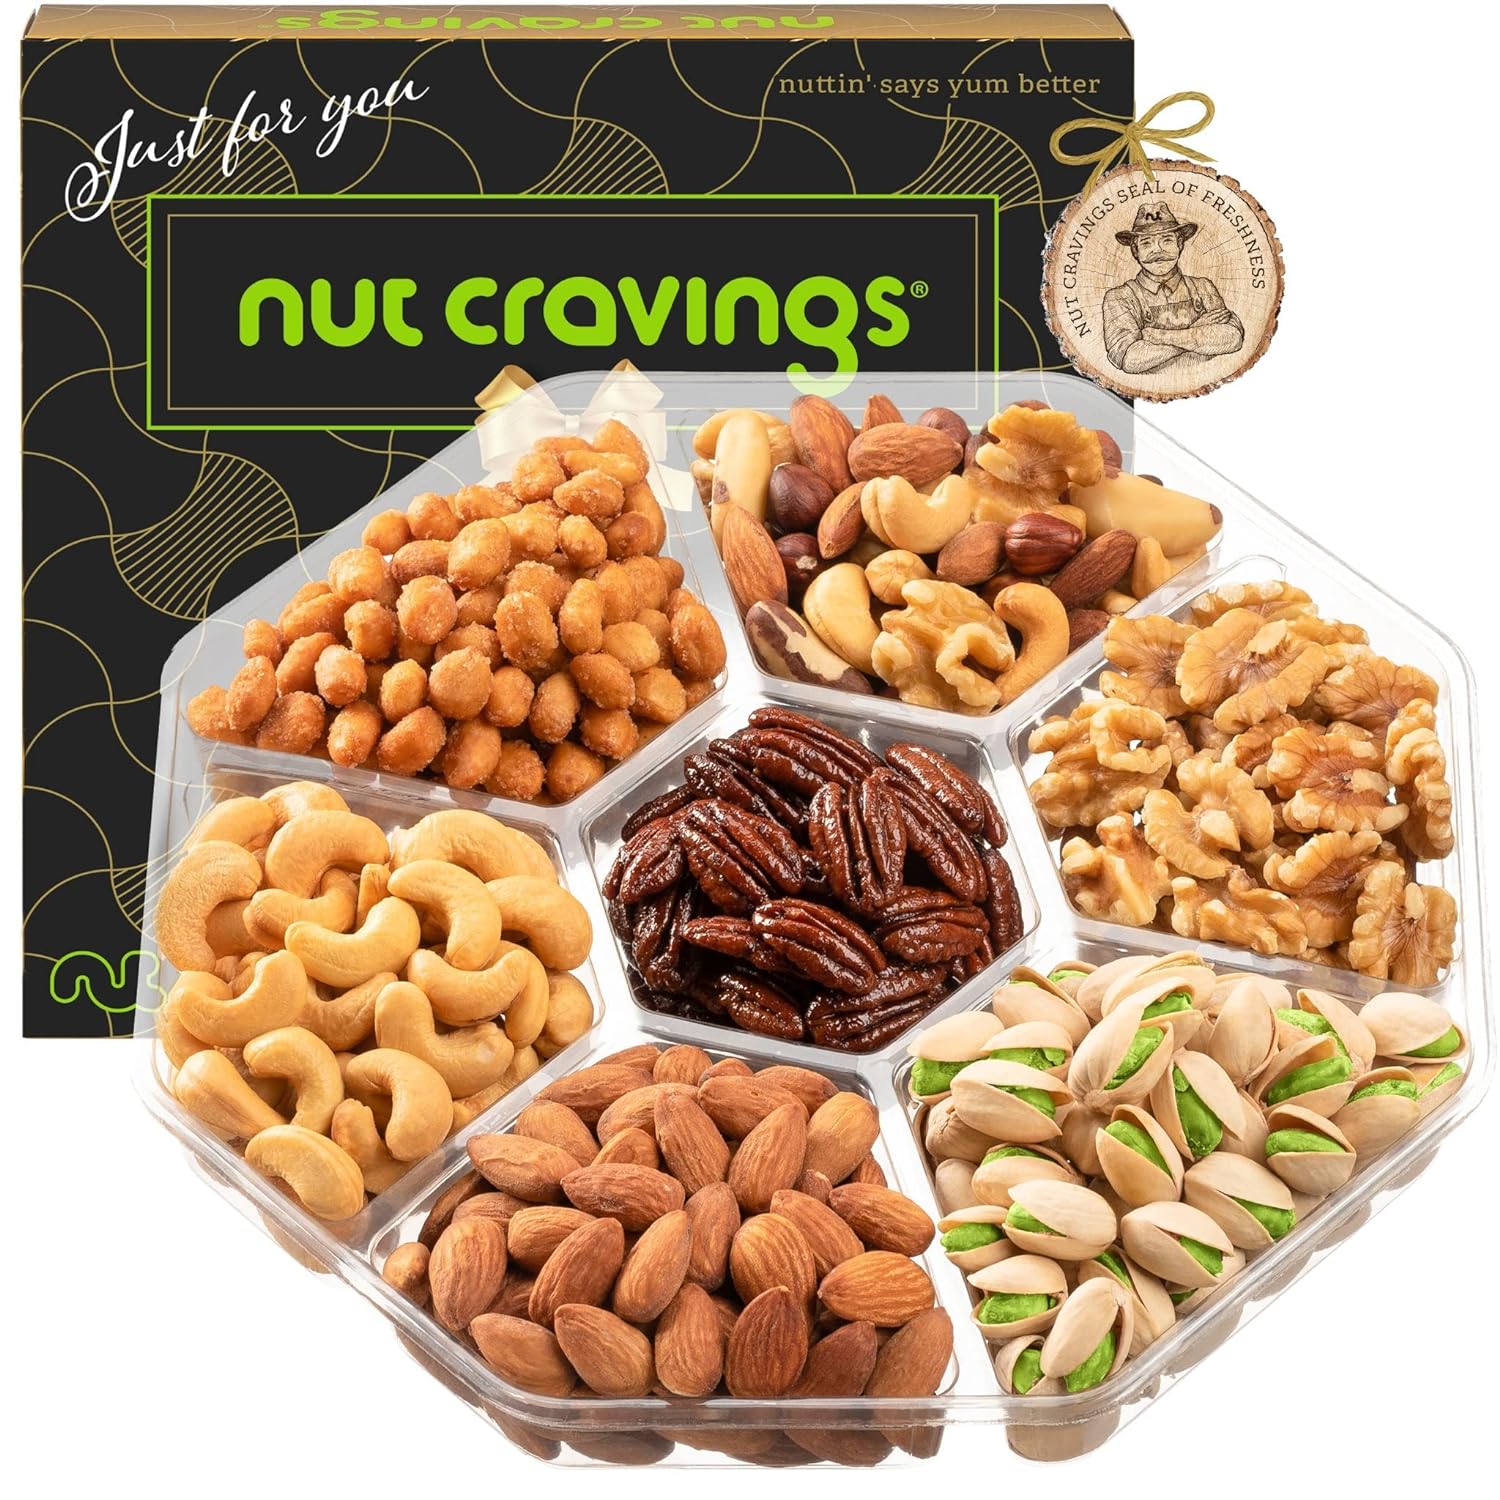 Nut Cravings Gourmet Collection - Mothers Day Mixed Nuts Gift Basket in Black Gold Box (7 Assortments, 1 LB) Arrangement Platter, Birthday Care Package - Healthy Kosher USA Made